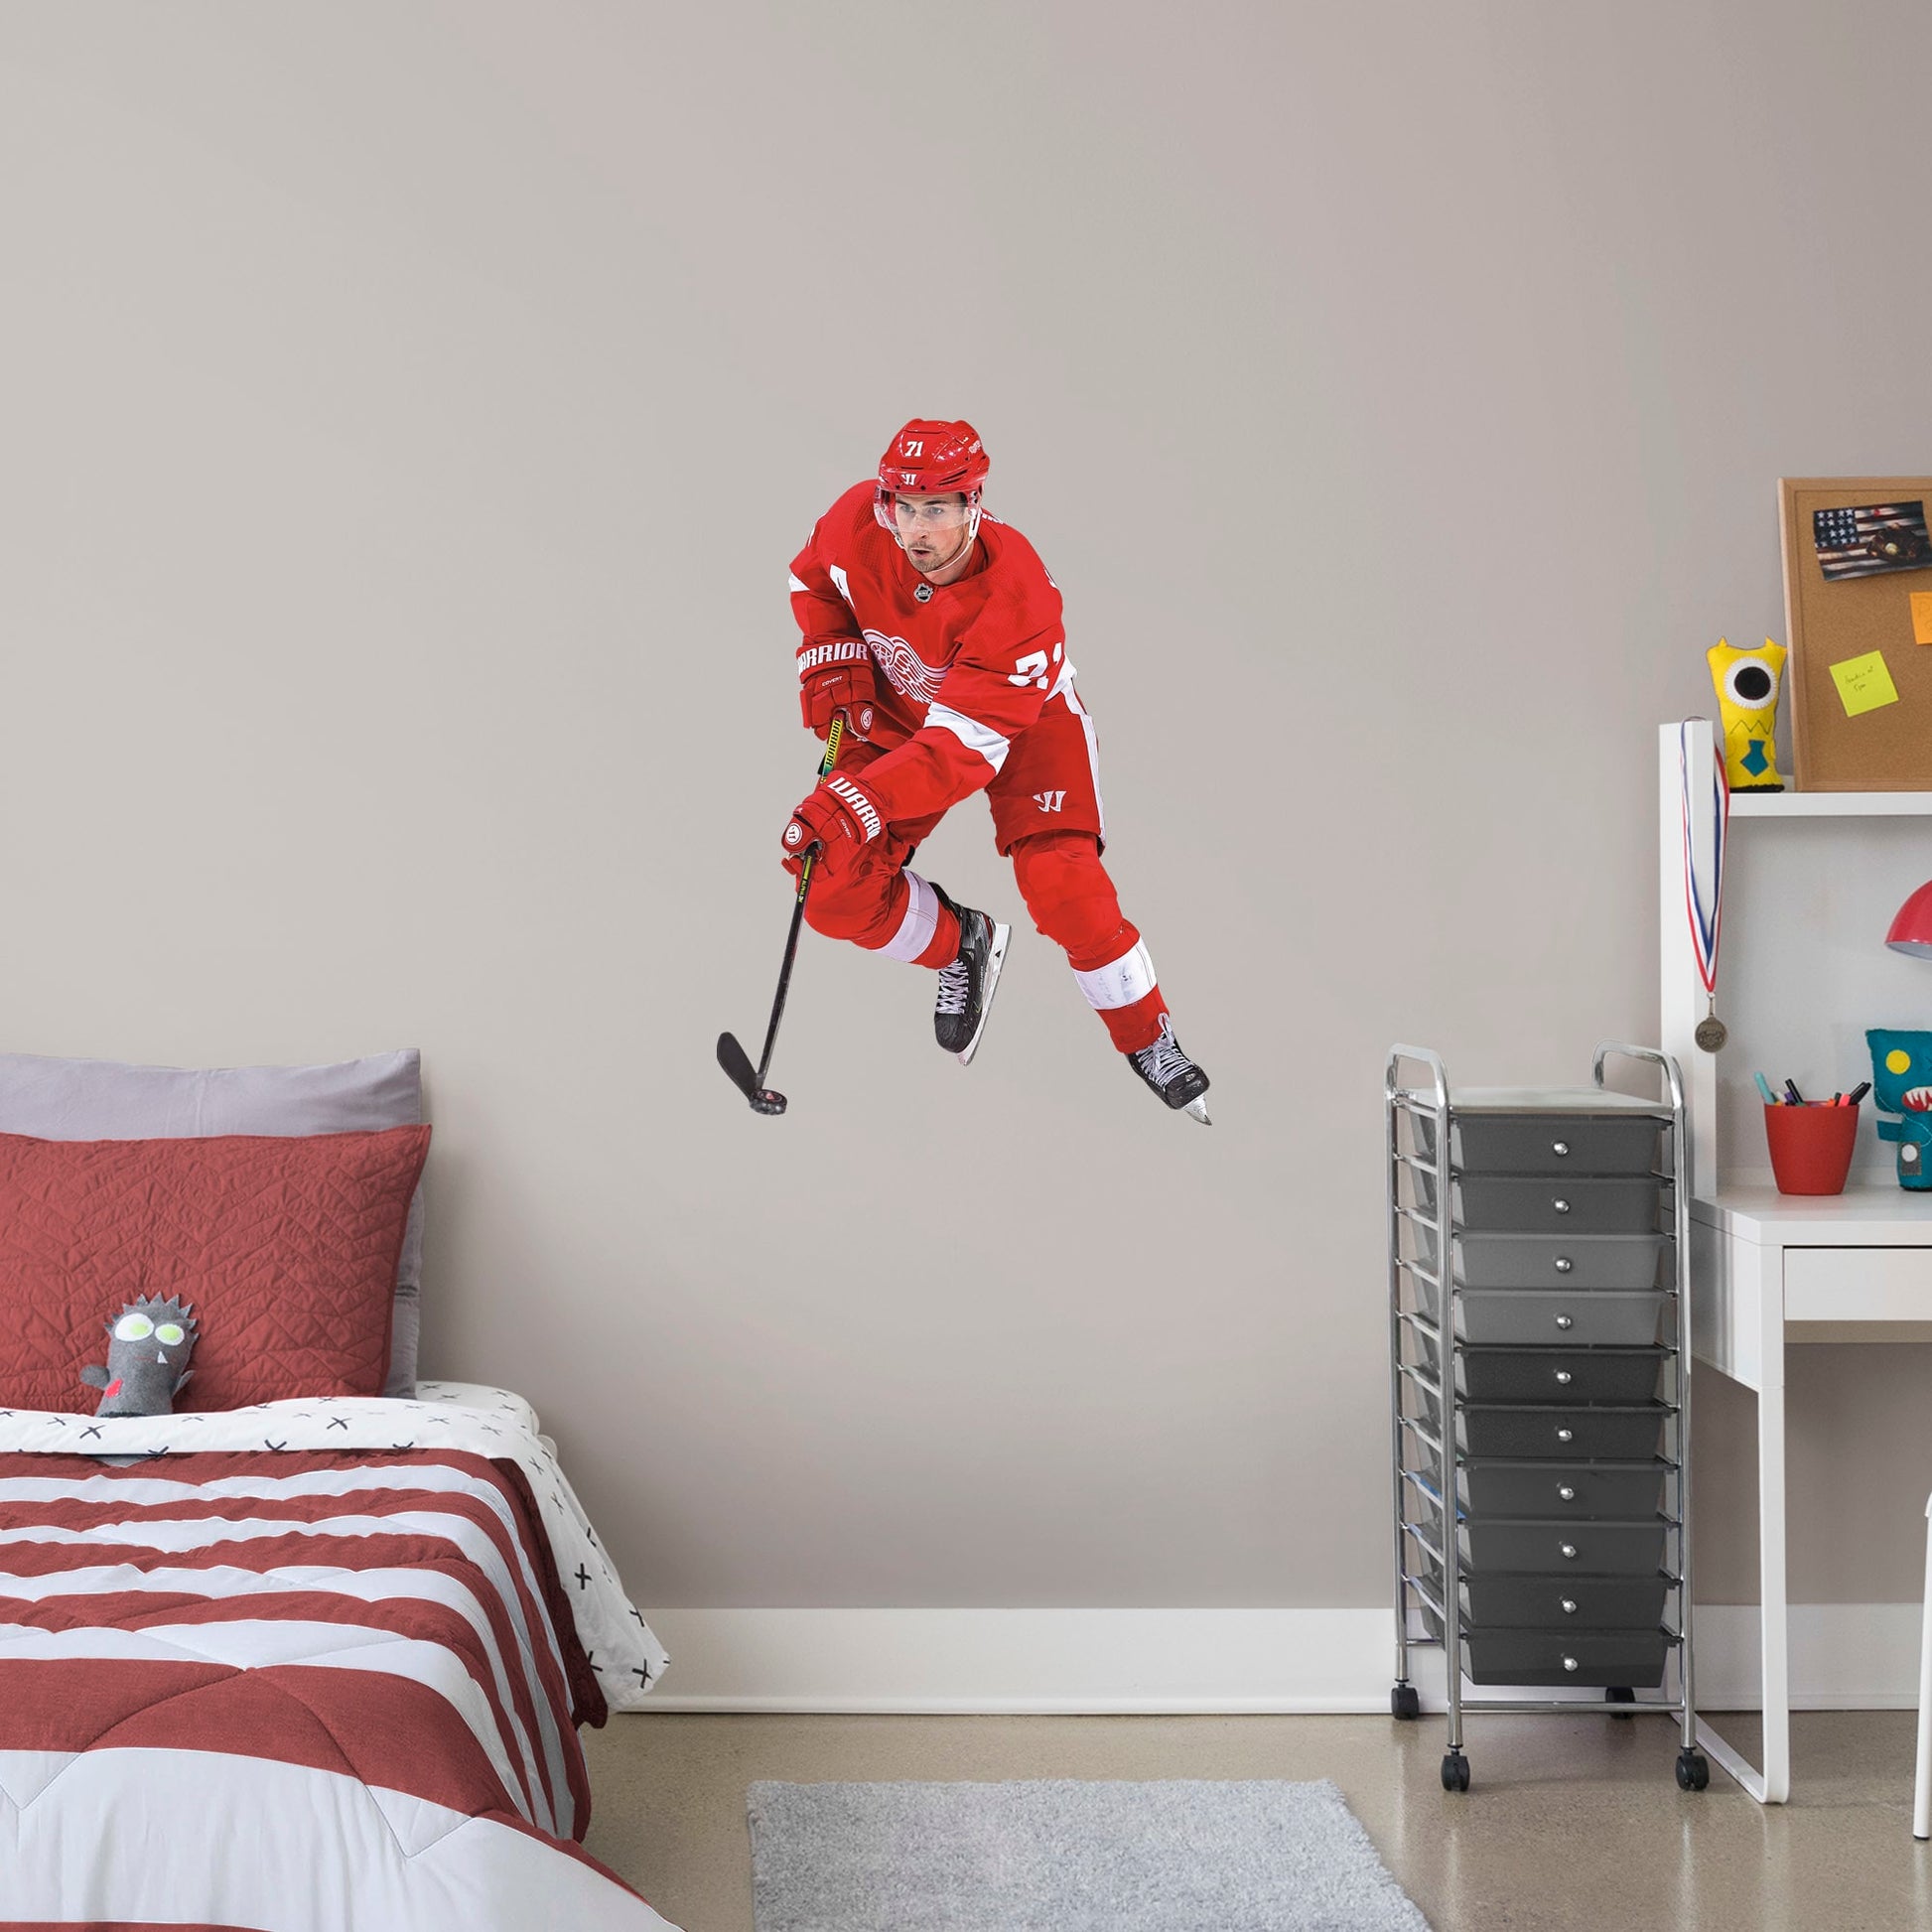 X-Large Athlete + 2 Decals (25"W x 36"H) From the University of Michigan to the Detroit Red Wings, Dylan Larkin has been a fan favorite for years, and now you can bring him to life in your own home. Larkin leads on the ice and is sure to bring that excitement to your bedroom, fan room, or office, it's almost as good as being at Little Caesars Arena!